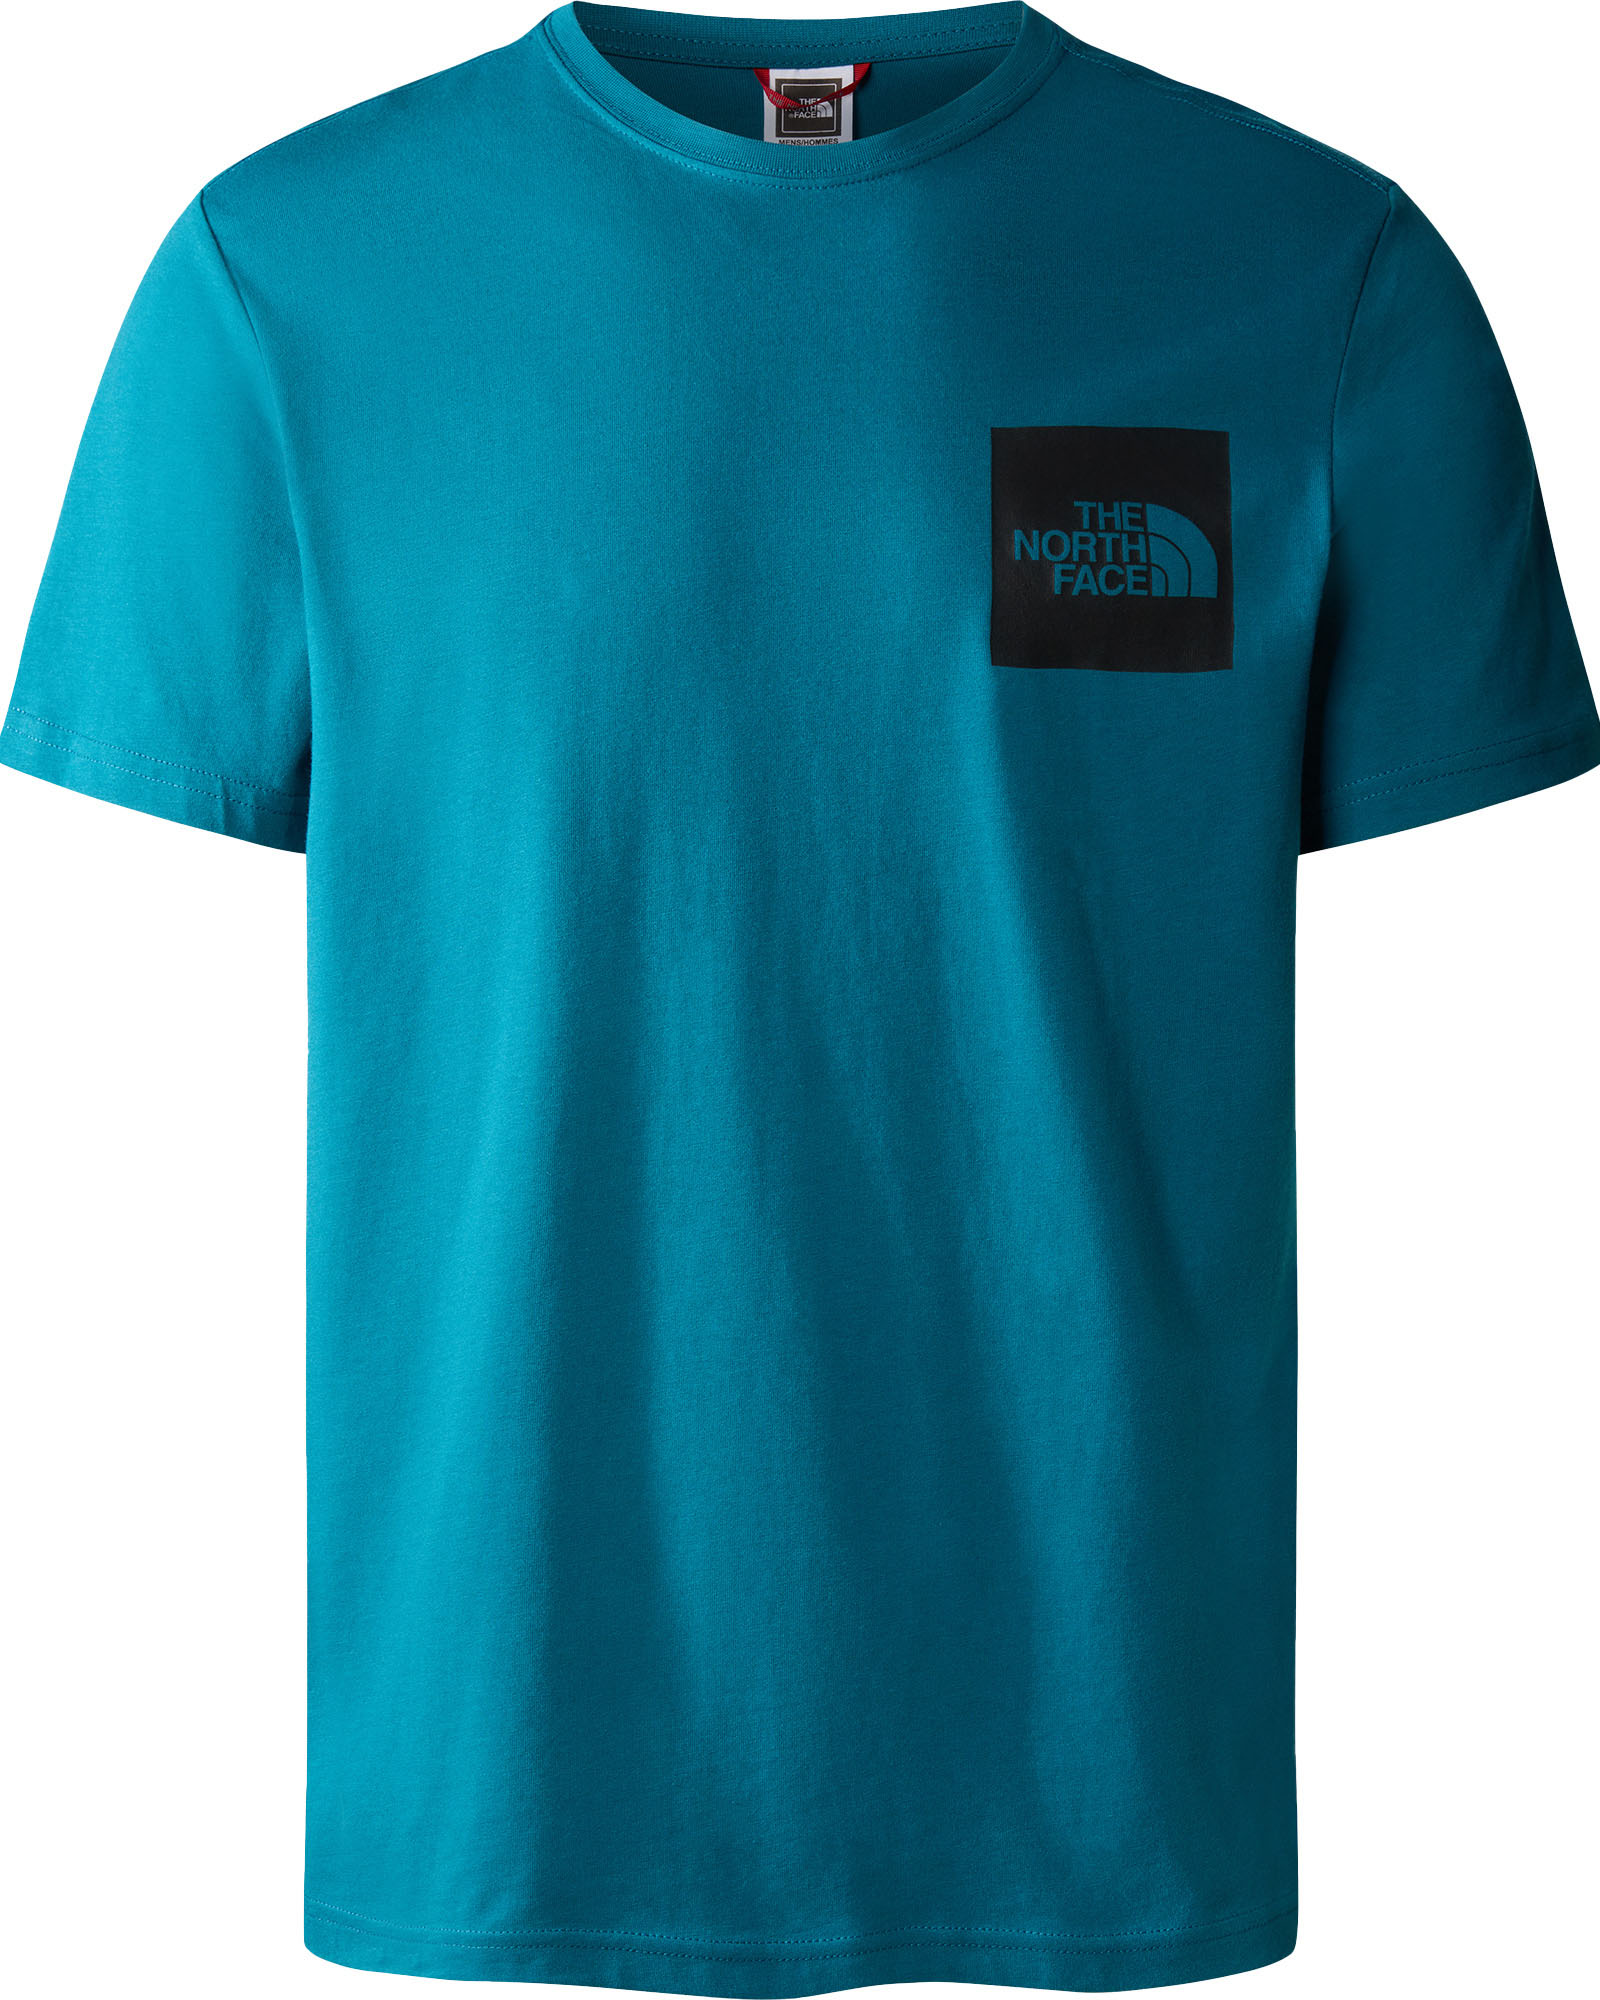 The North Face Fine Men’s Tee - Blue Coral M